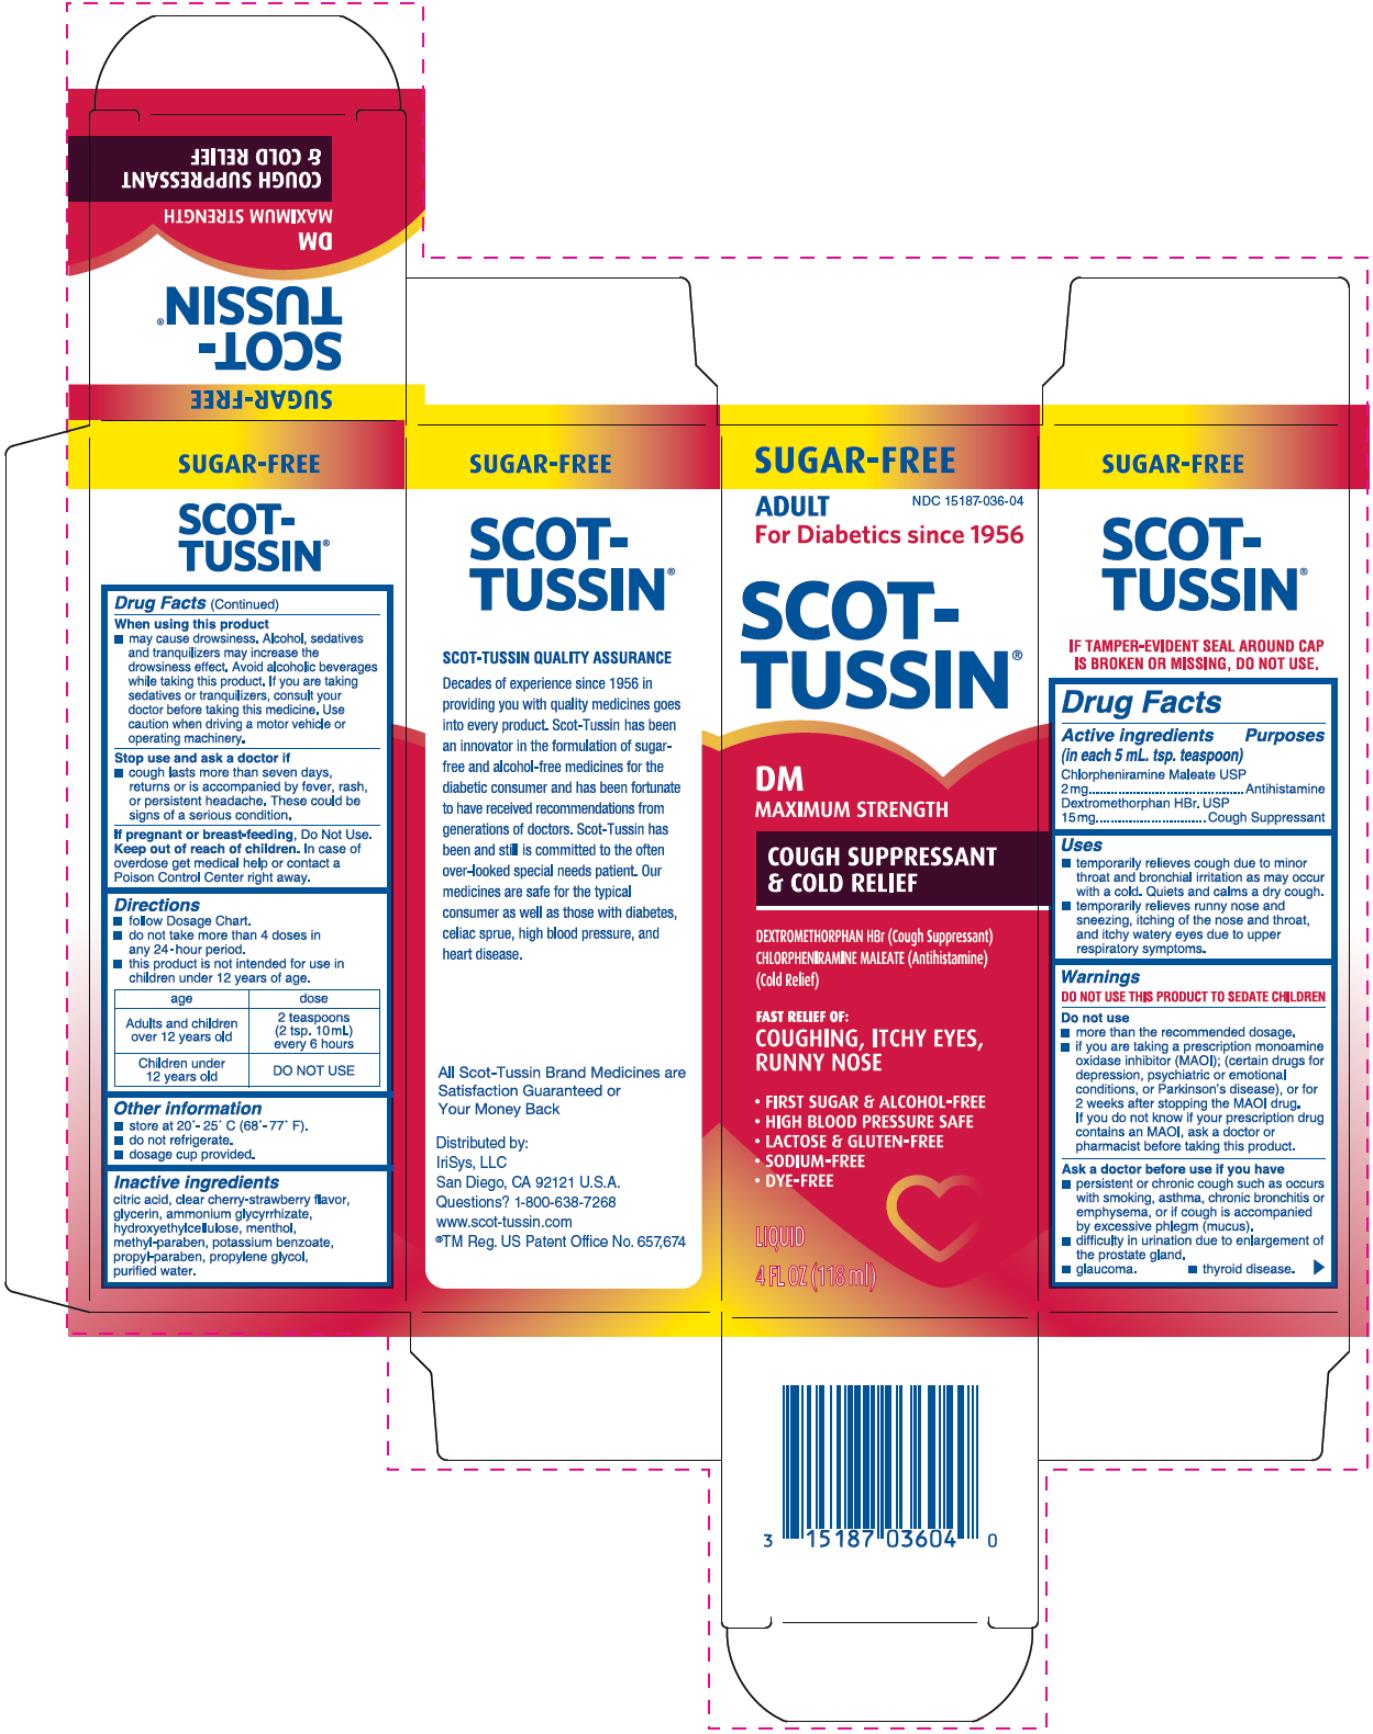 PRINCIPAL DISPLAY PANEL 
SUGAR-FREE
ADULT	NDC: <a href=/NDC/15187-036-04>15187-036-04</a>
For Diabetics since 1956
SCOT-TUSSIN®
DM
MAXIMUM STRENGTH
COUGH SUPPRESSANT
& COLD RELIEF
DEXTROMETHORPHAN HBr (Cough Suppressant)
CHLORPHEN